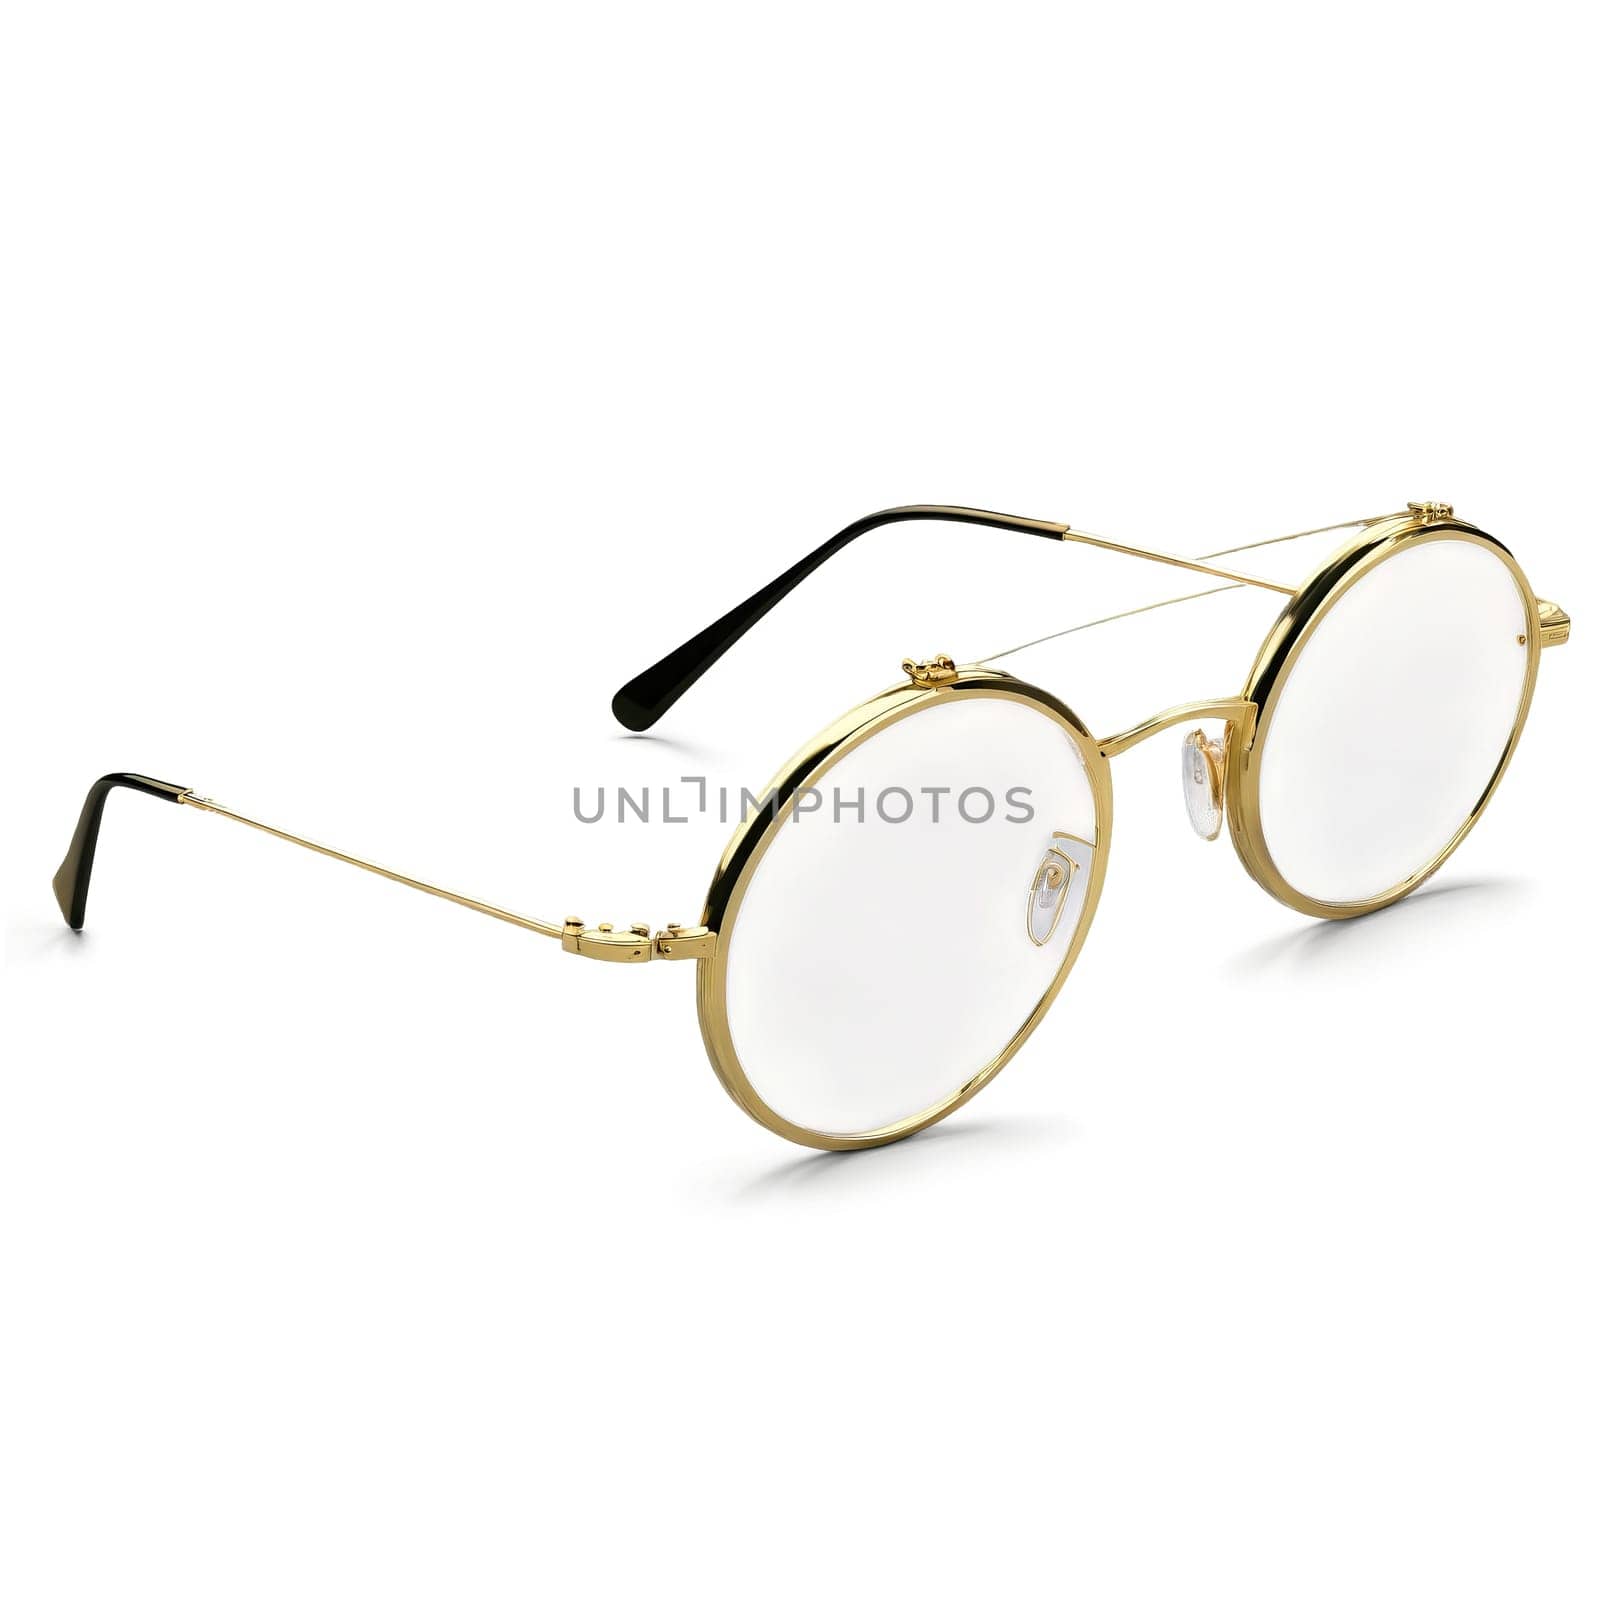 Round glasses with gold tone metal frames and photochromic lenses adapting to changing light conditions by panophotograph